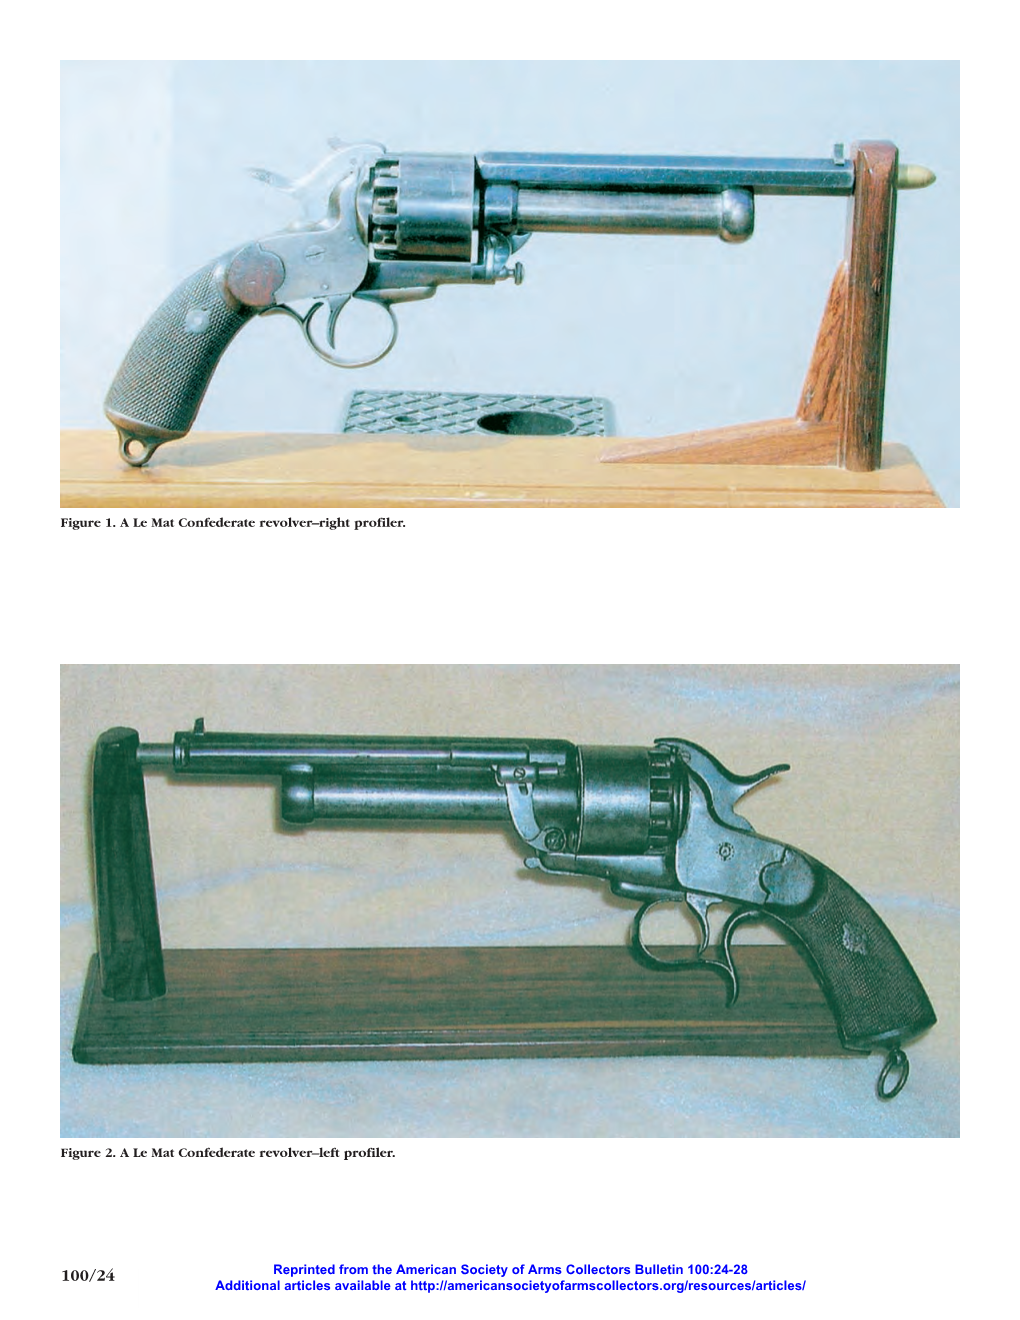 Some Thoughts on the Confederate Lemat Revolver